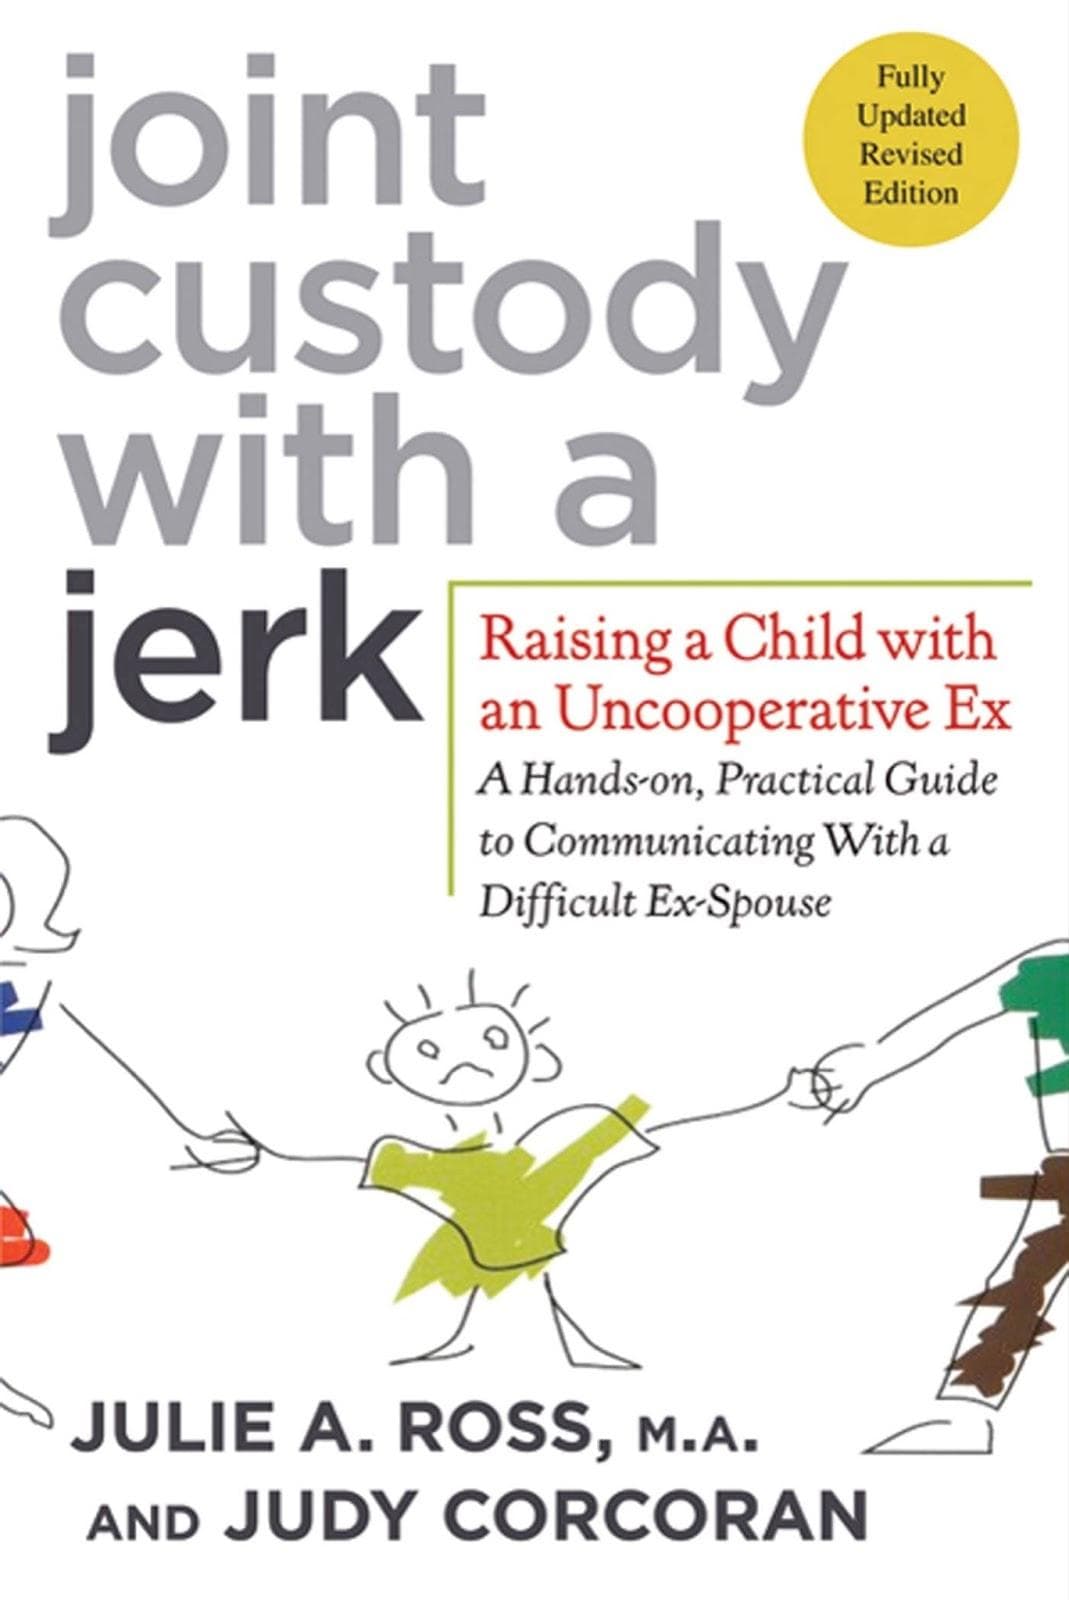 Joint Custody with a Jerk: Raising a Child with an Uncooperative Ex by Julie A. Ross and Judy Corcoran